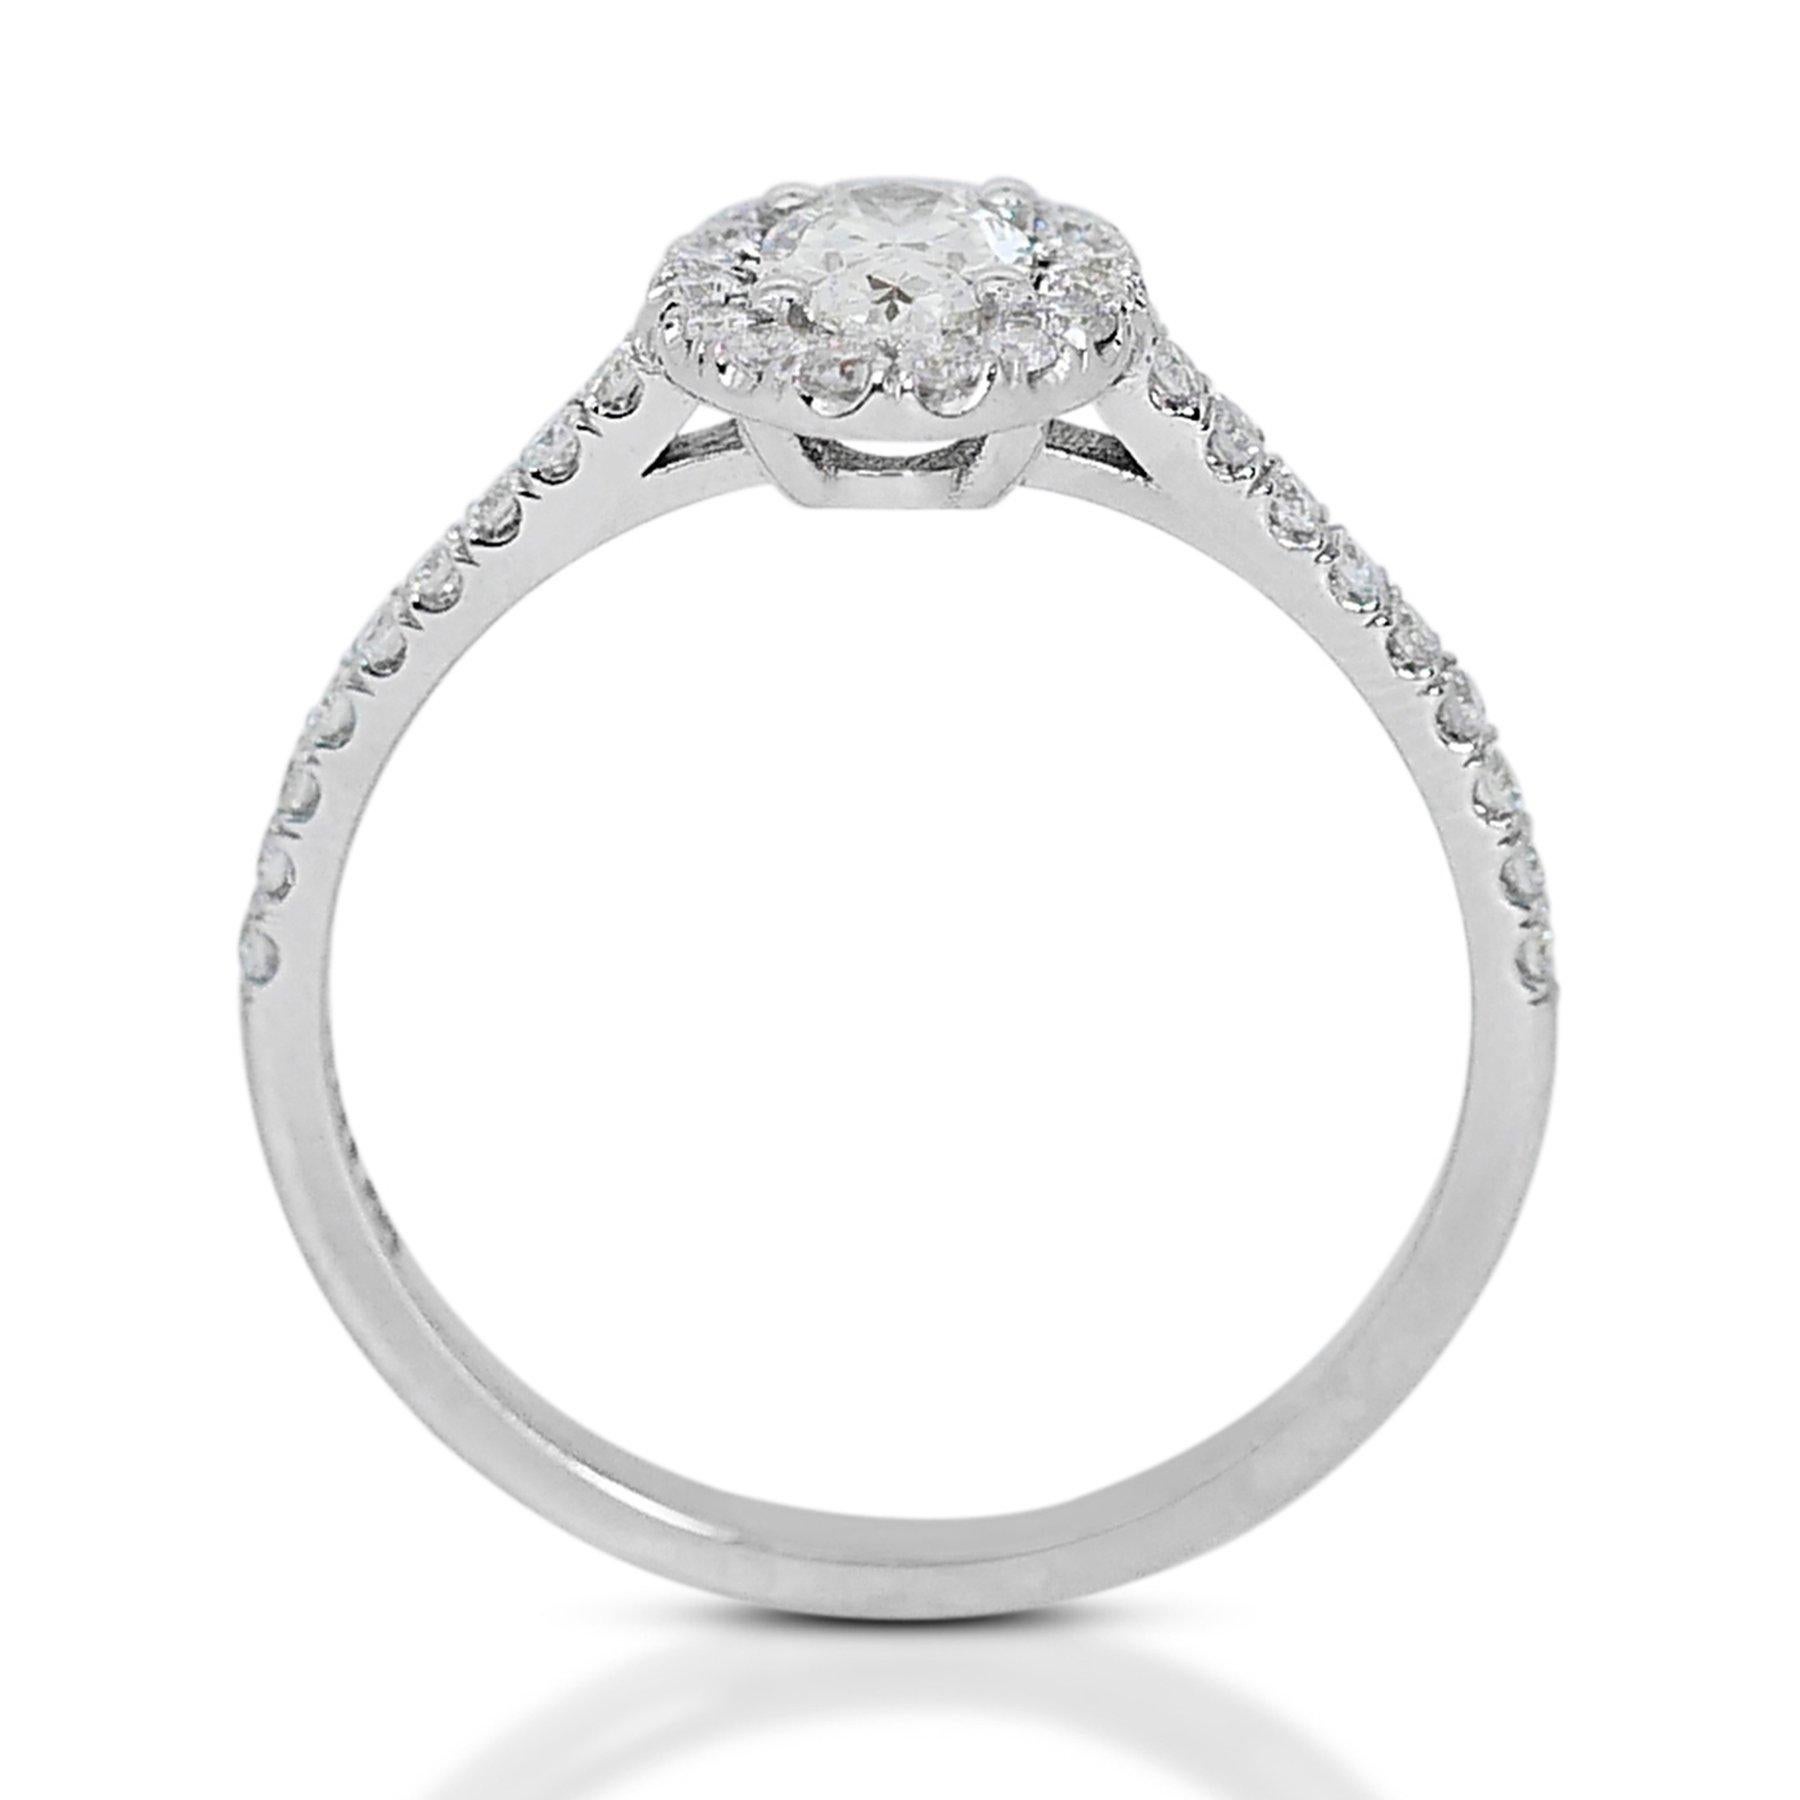 Sparkling 1.00ct Oval Diamond Halo Ring in 18k White Gold - GIA Certified 2